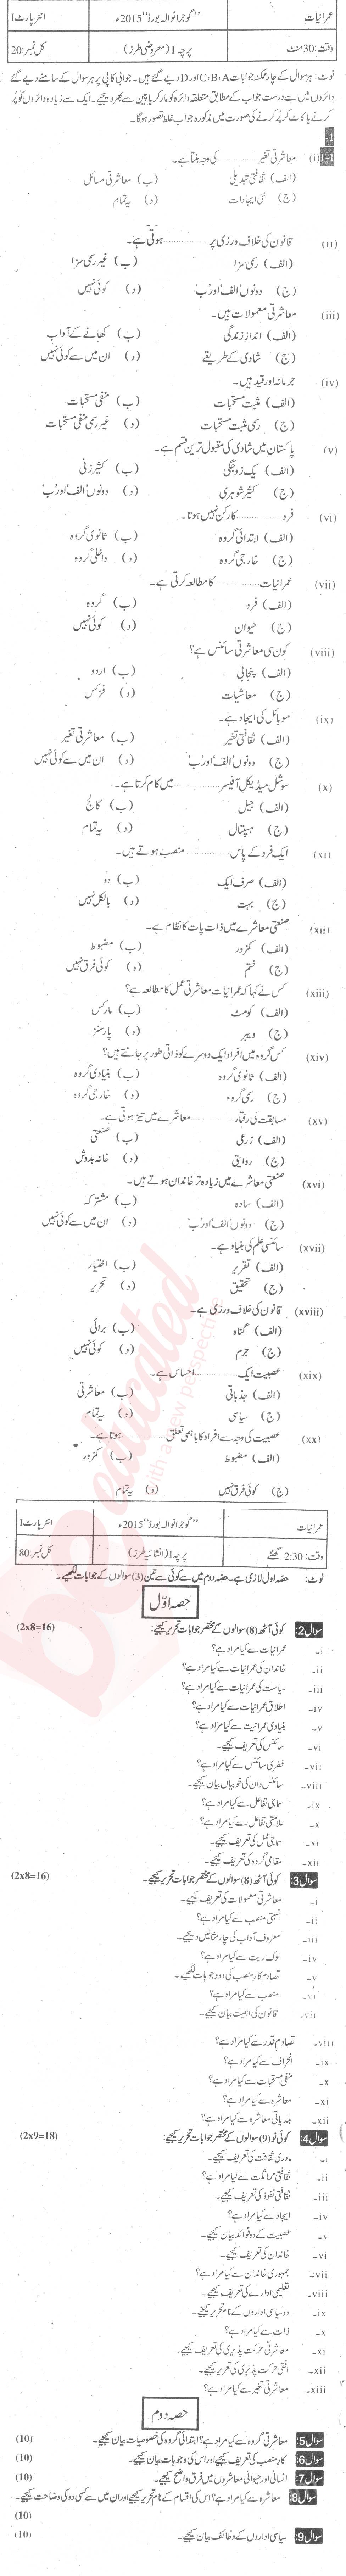 Sociology FA Part 1 Past Paper Group 1 BISE Gujranwala 2015